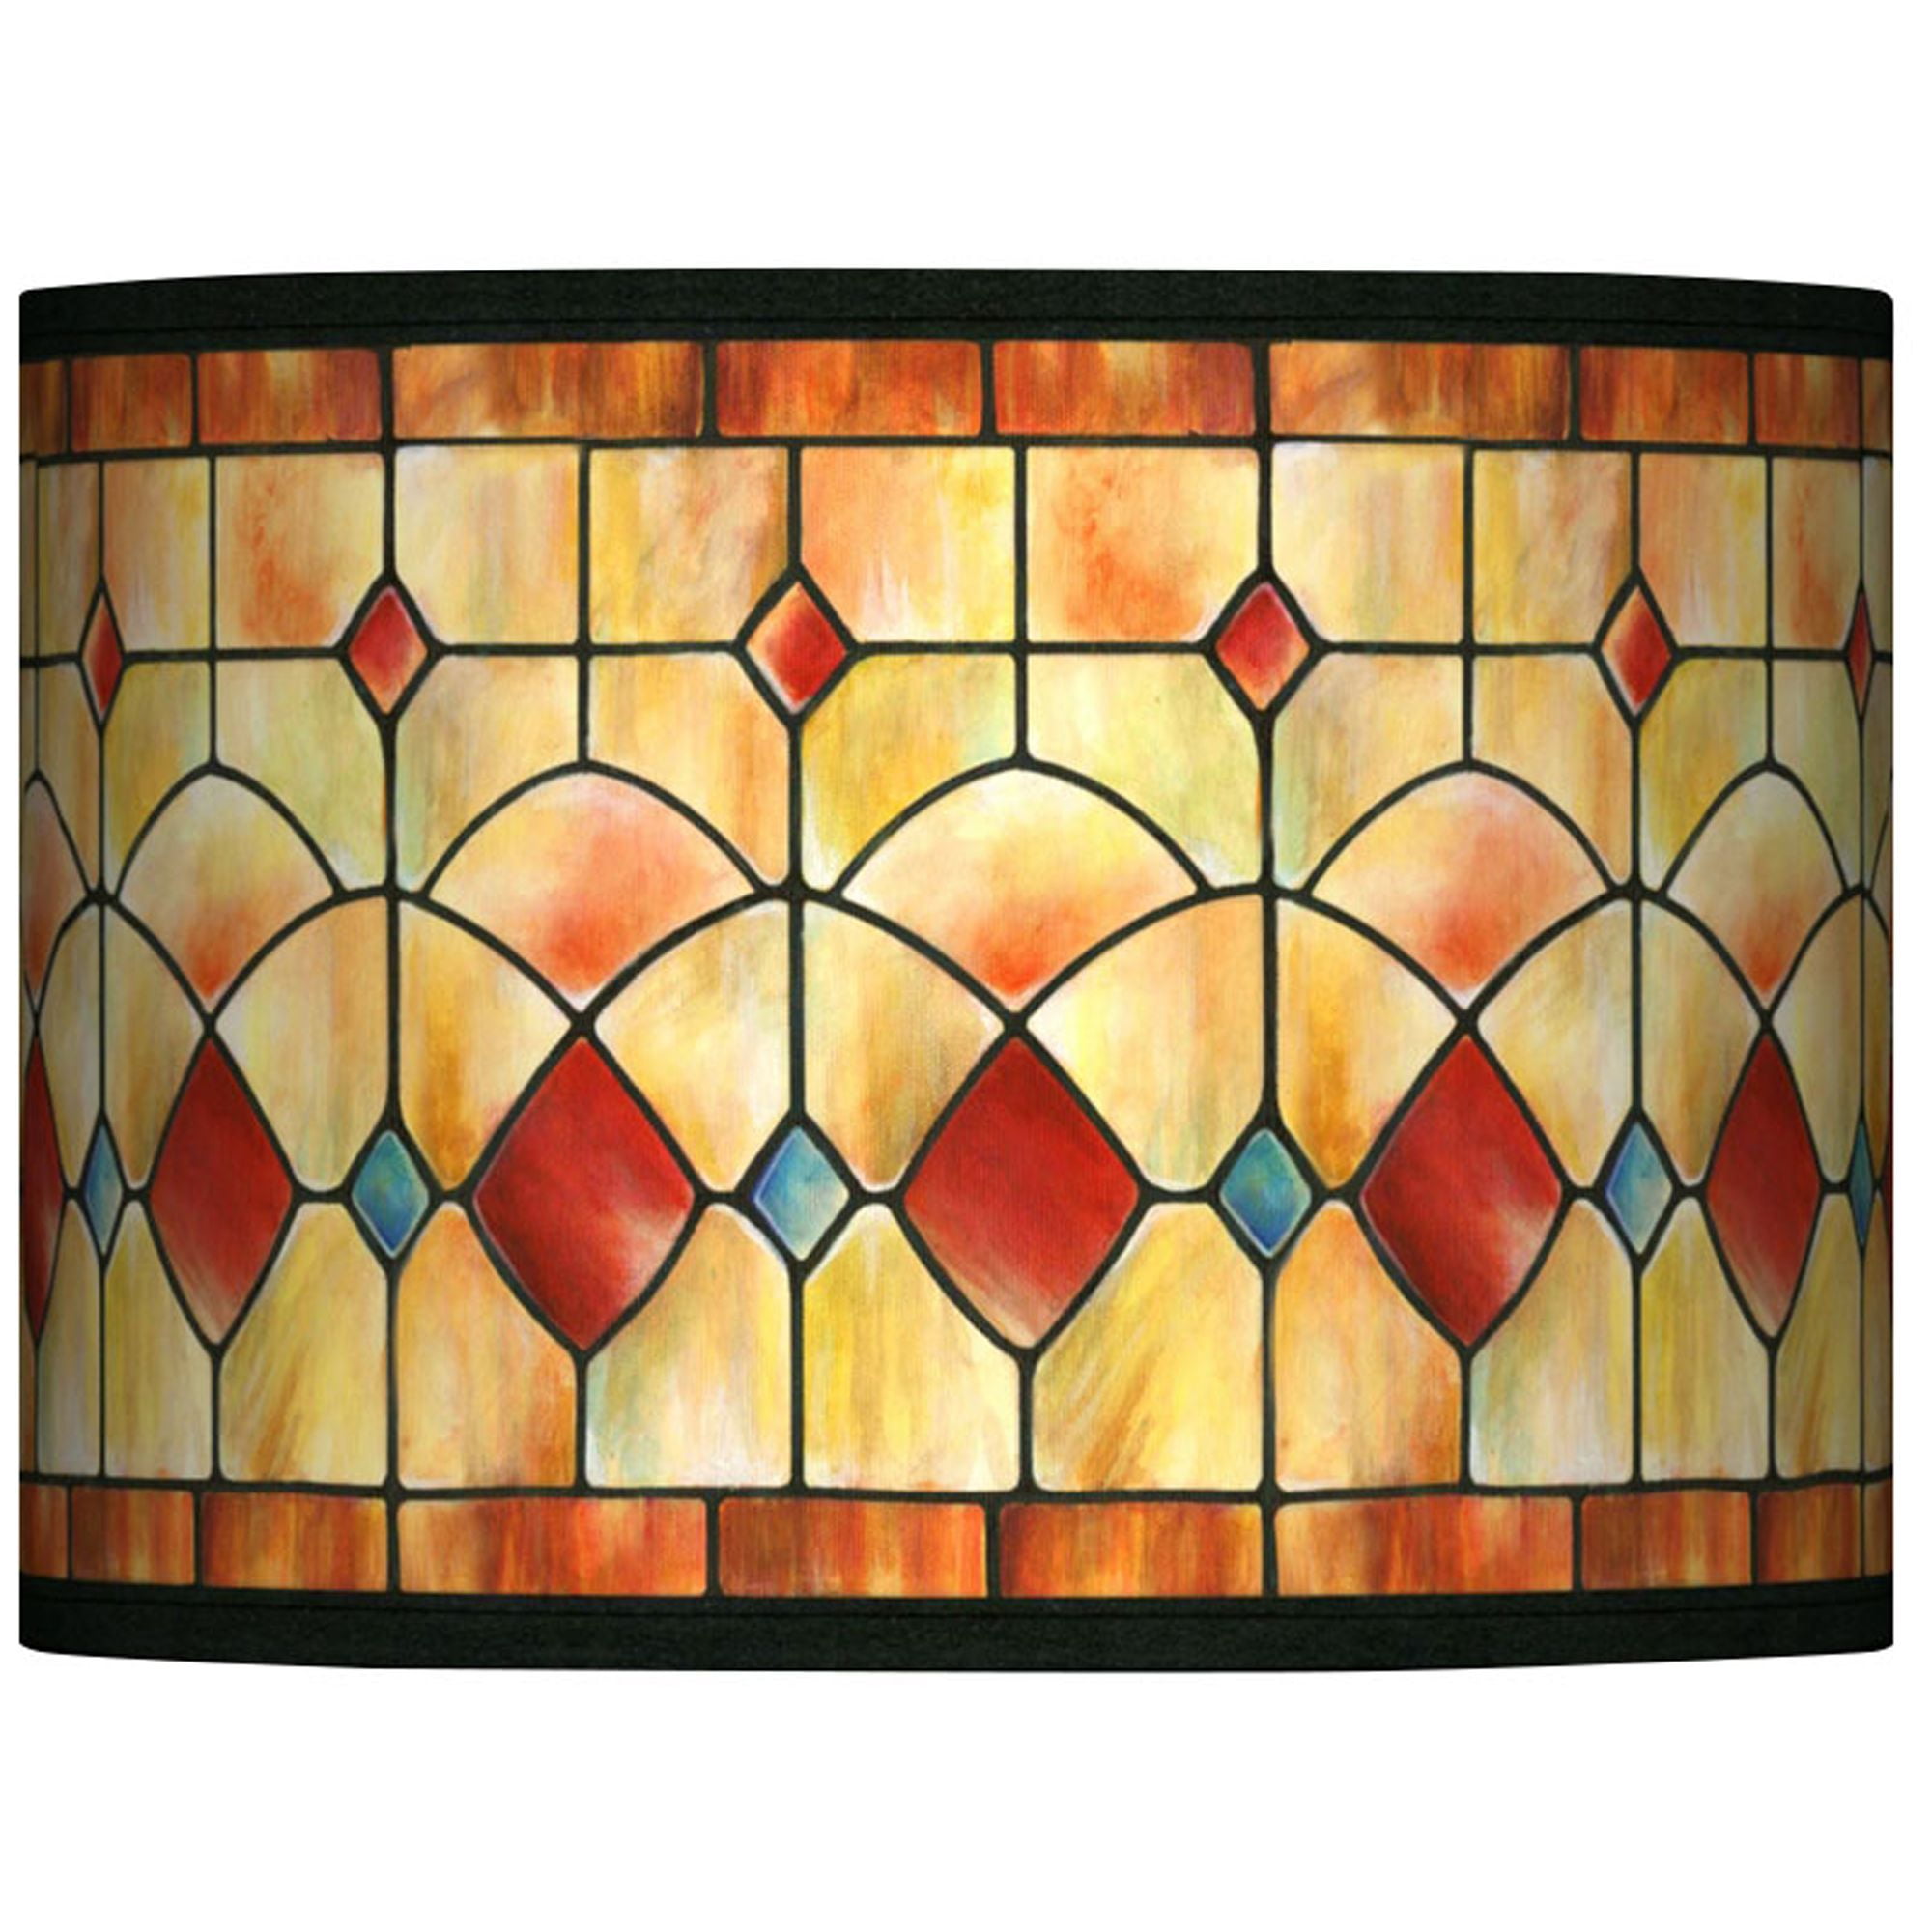 Custom Made 10" Lampshade Mosaic Stained Glass Digital Print 